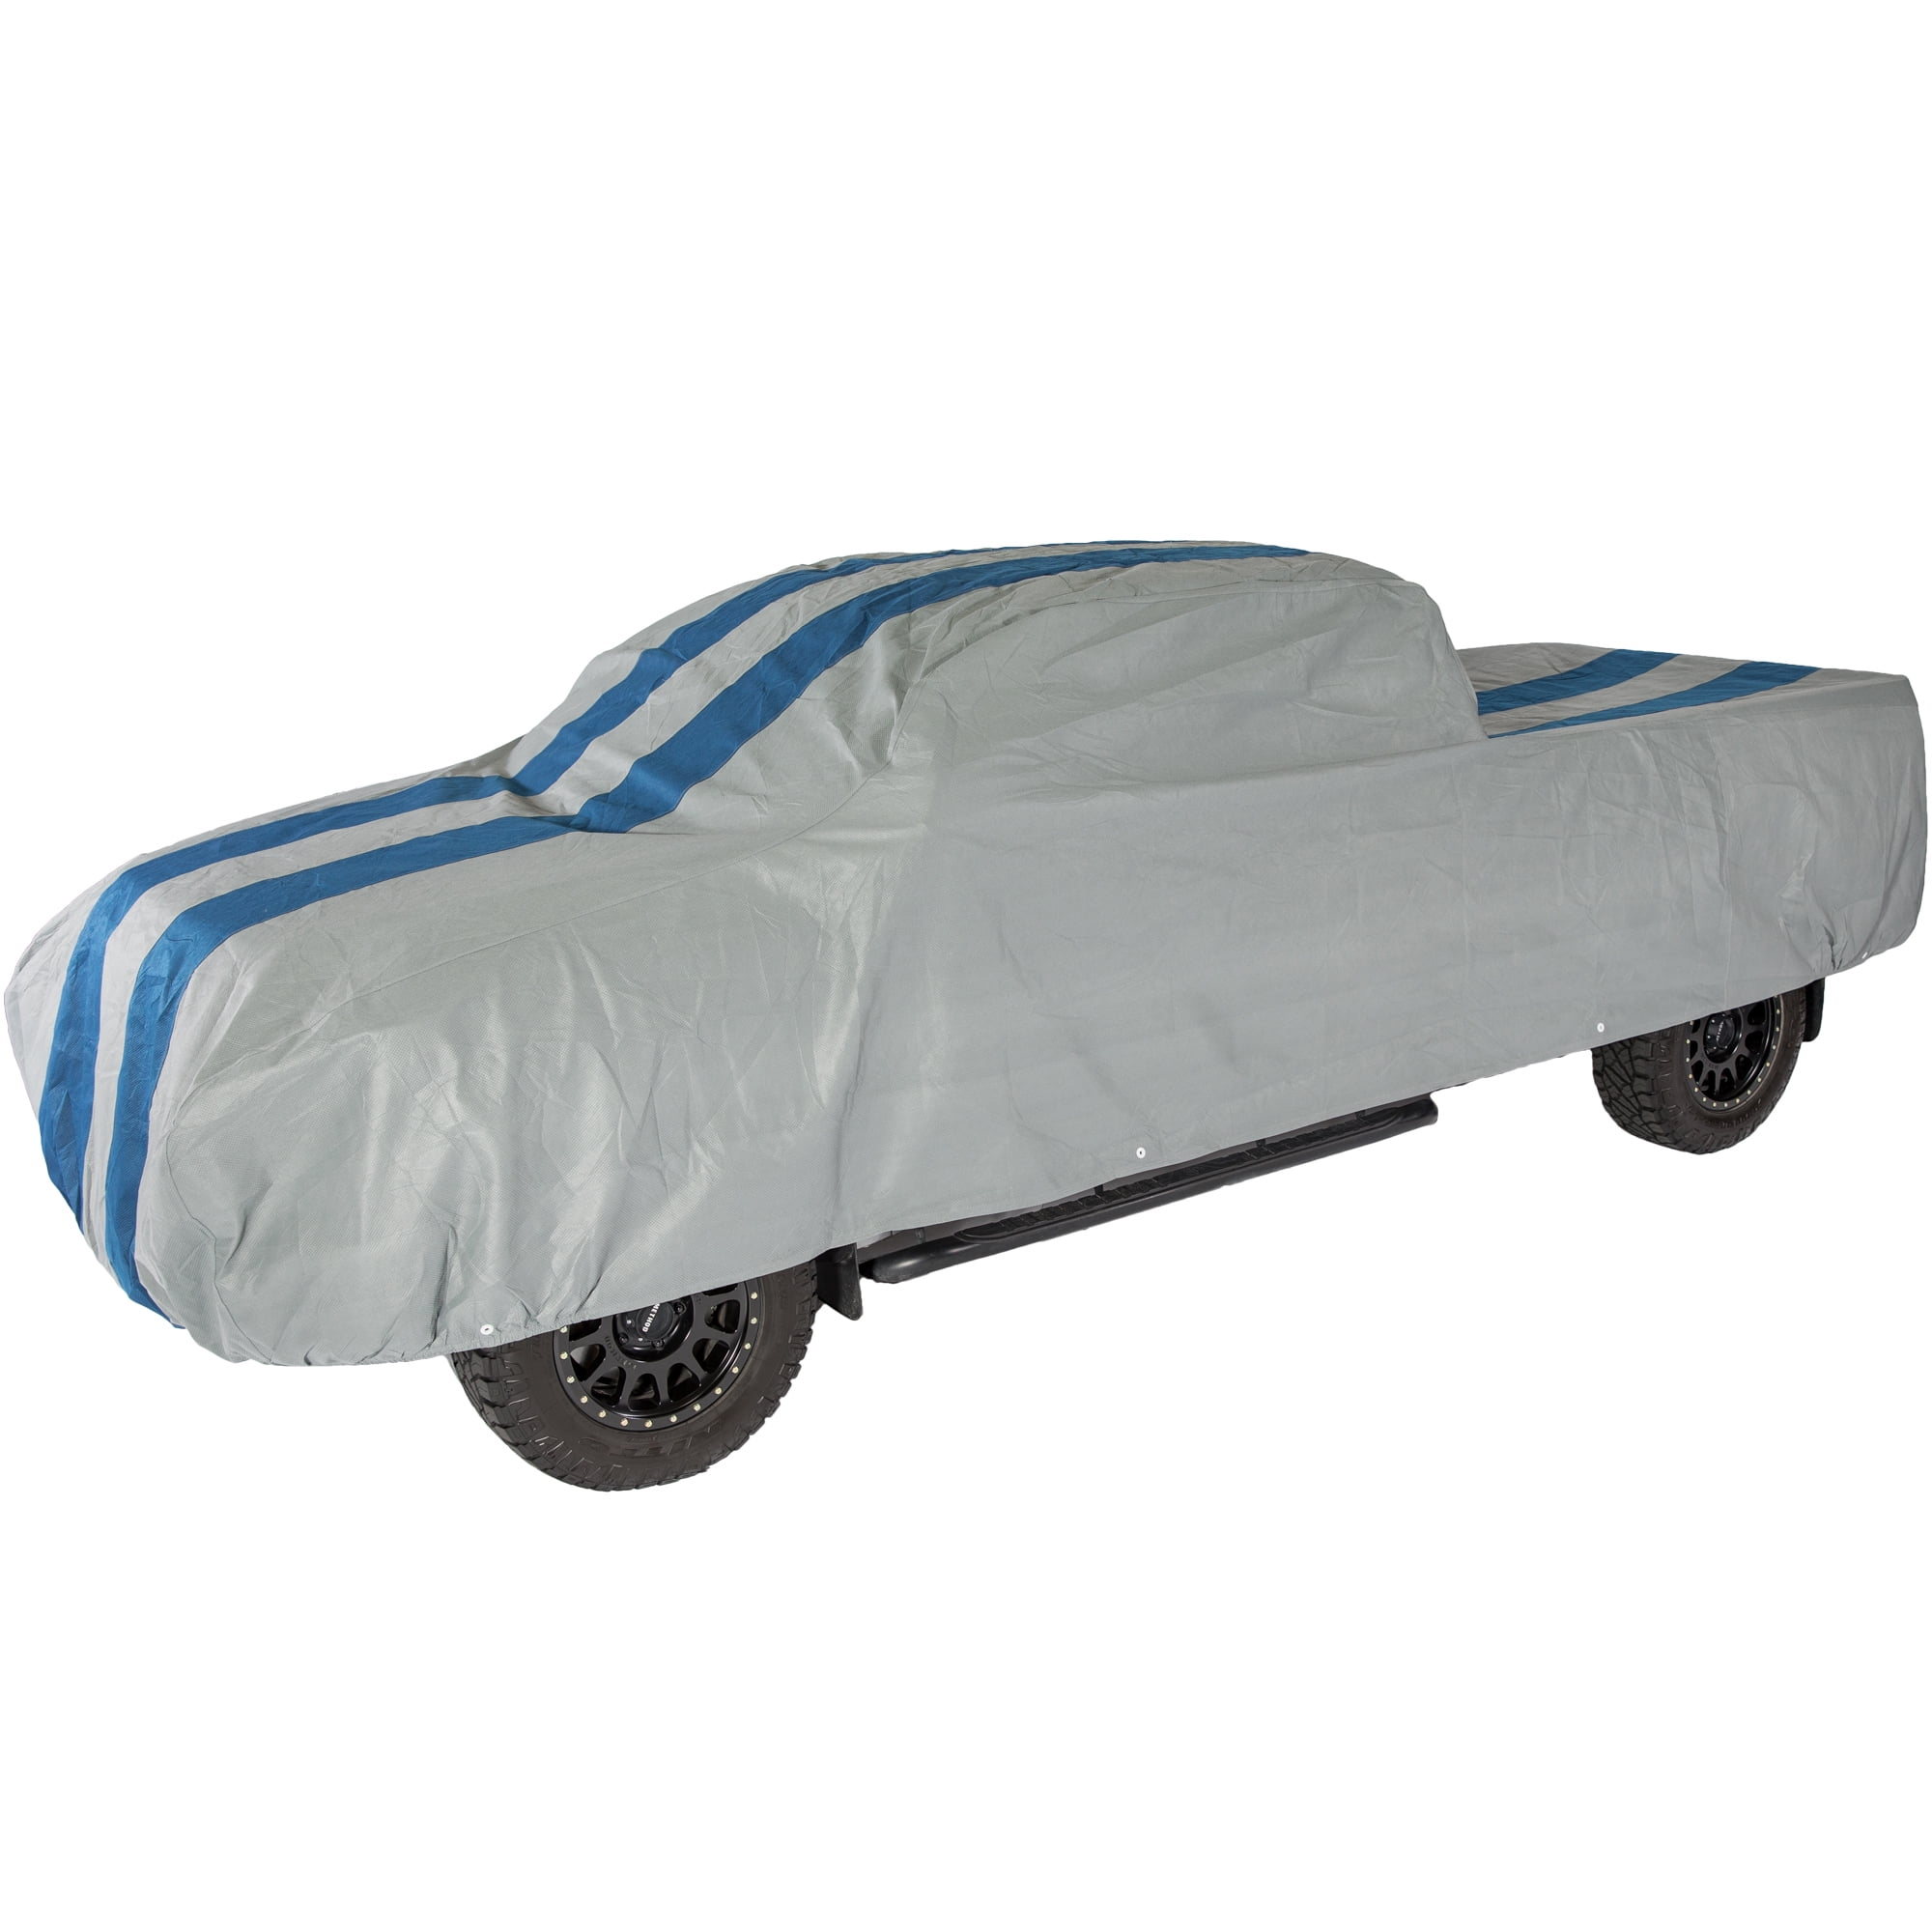 Duck Covers Rally X Defender Pickup Truck Cover, Fits Standard Cab Trucks up  to 16 ft. in. L